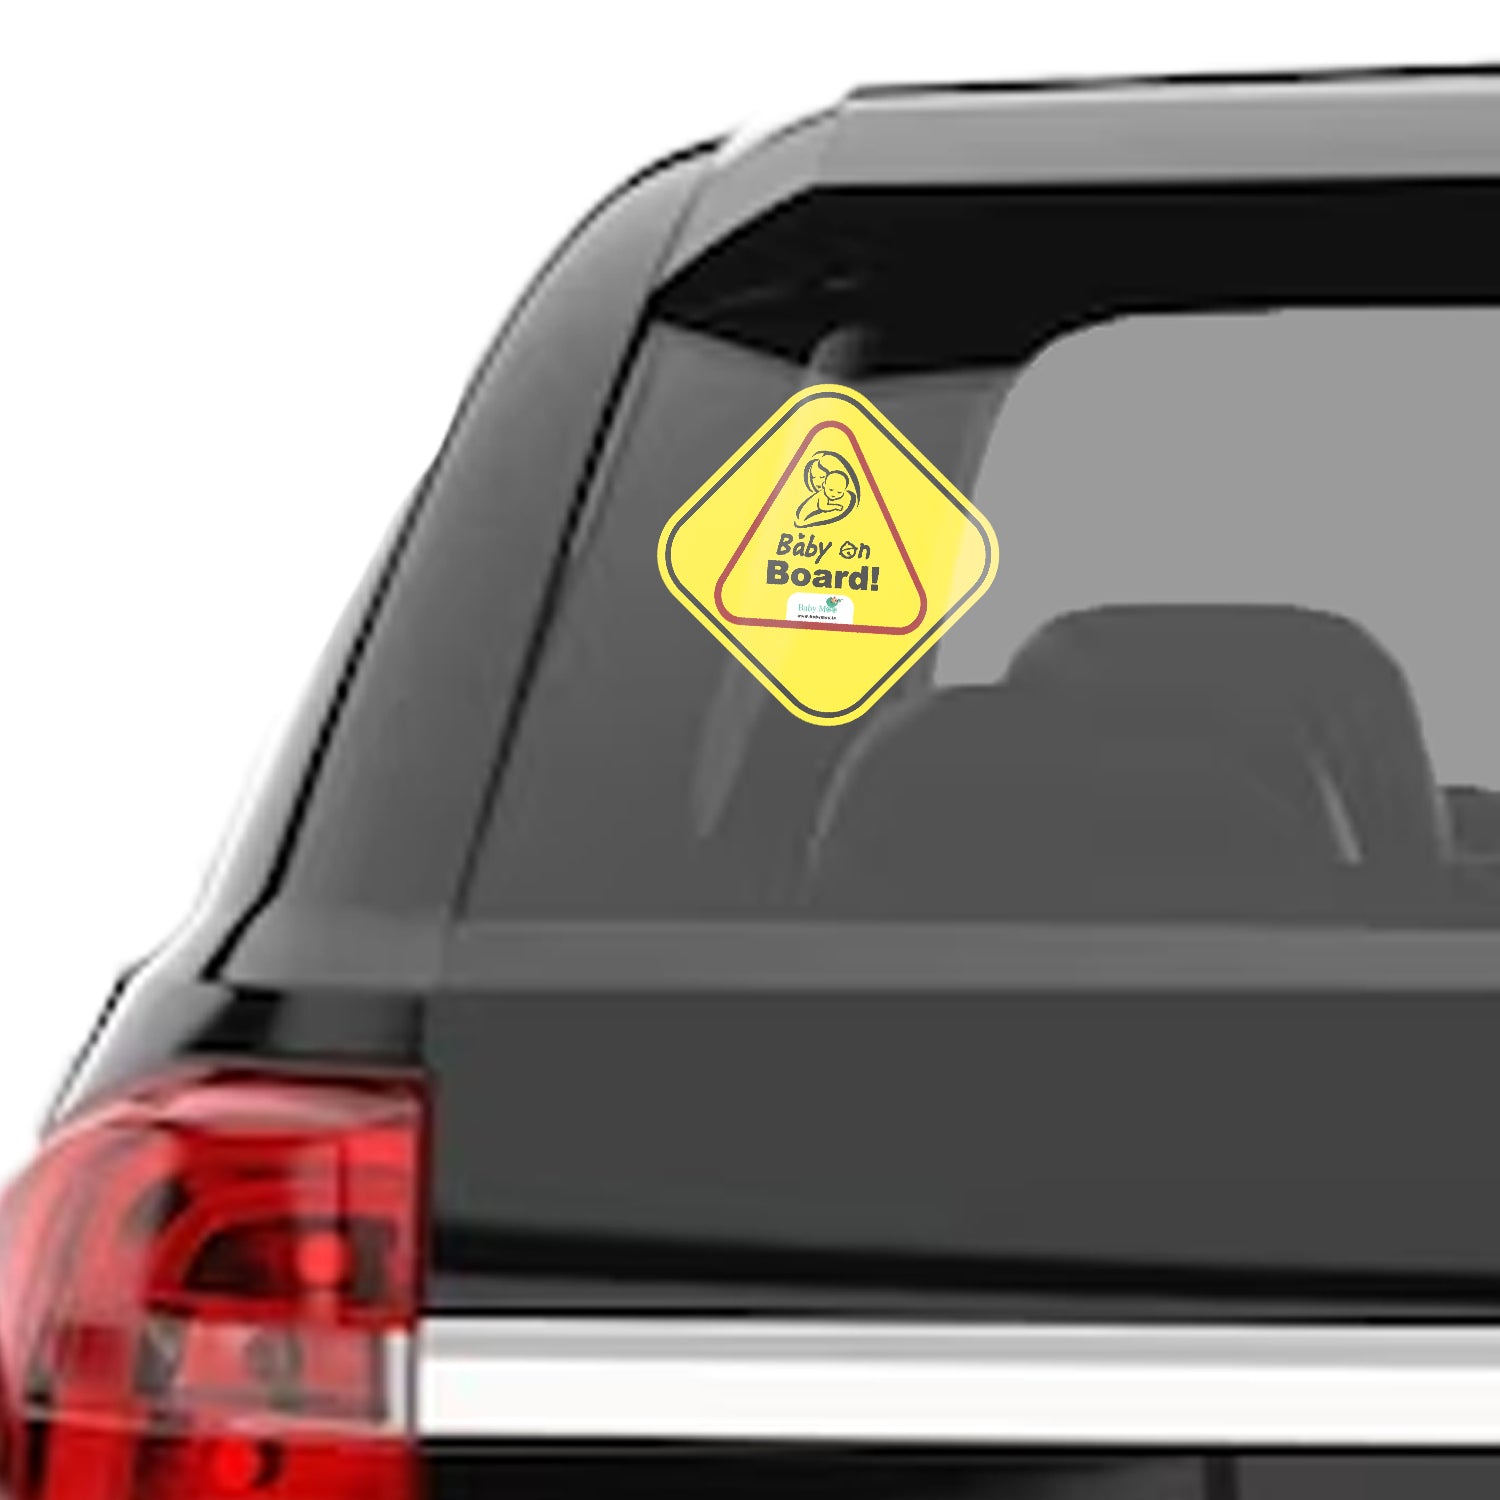 Assured Signs Baby on Board Car Sticker Signs, 2 Pack, 5 x 5, Yellow